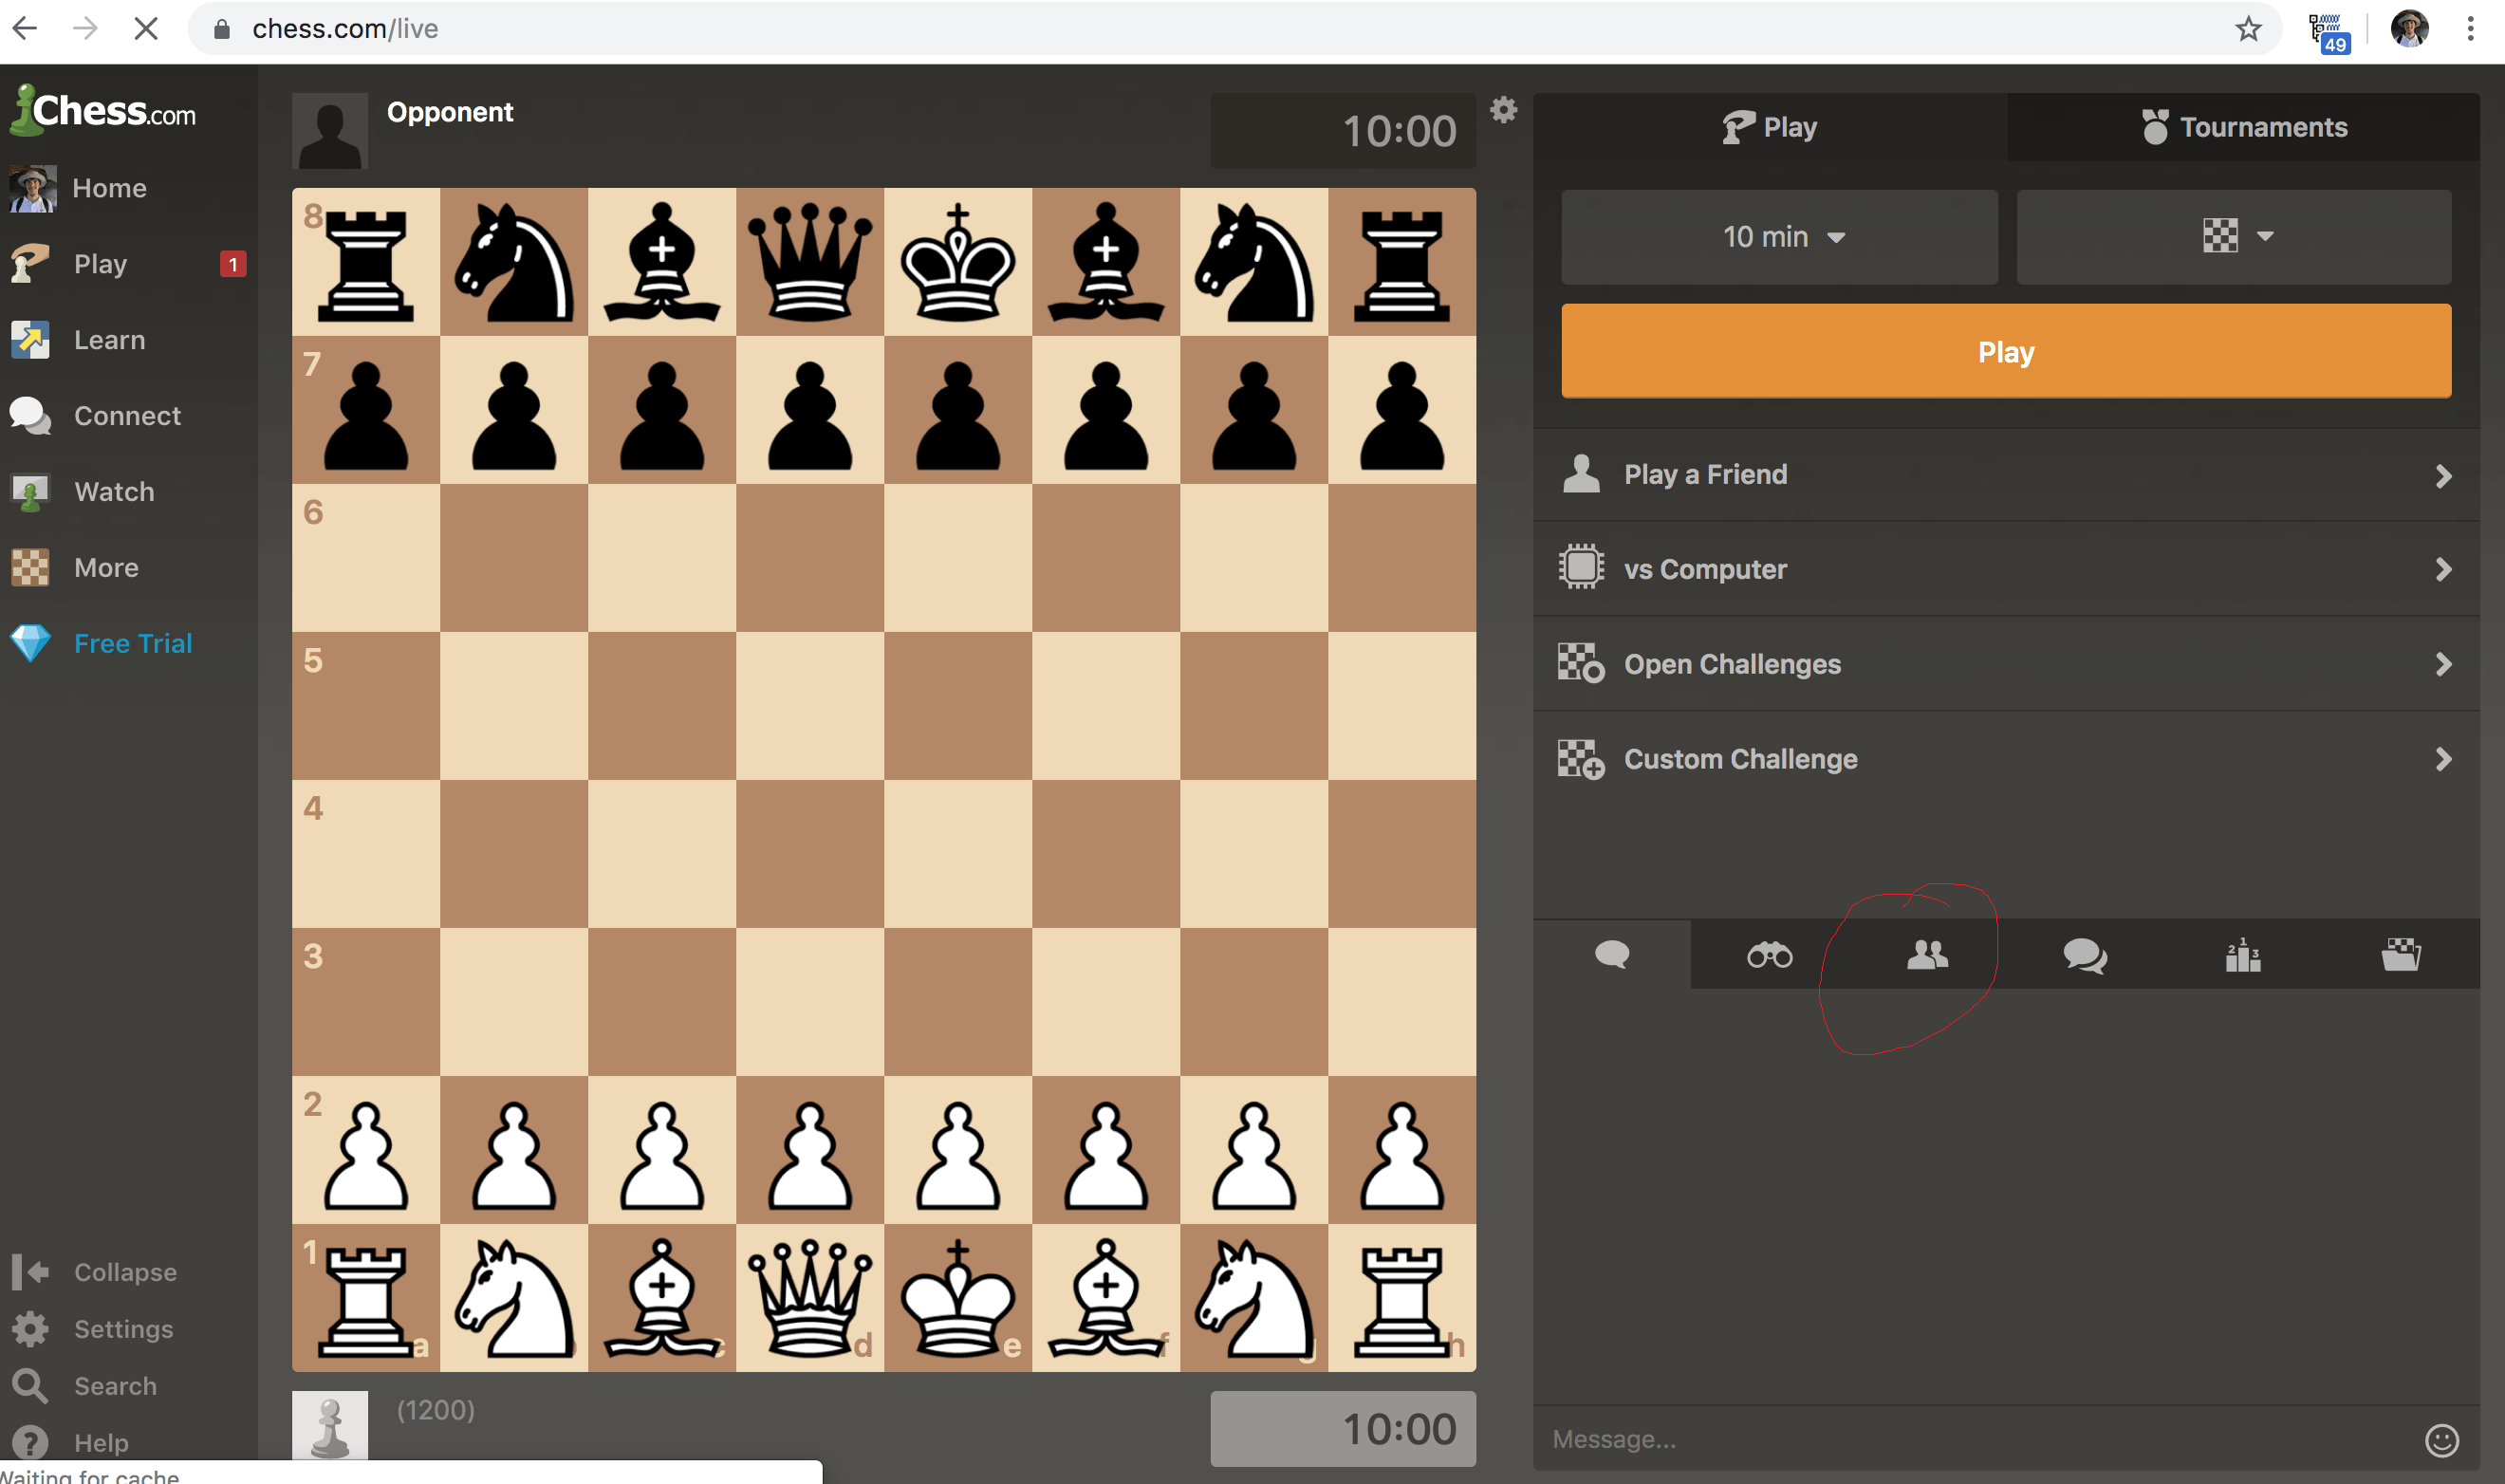 How do I play a friend? - Chess.com Member Support and FAQs